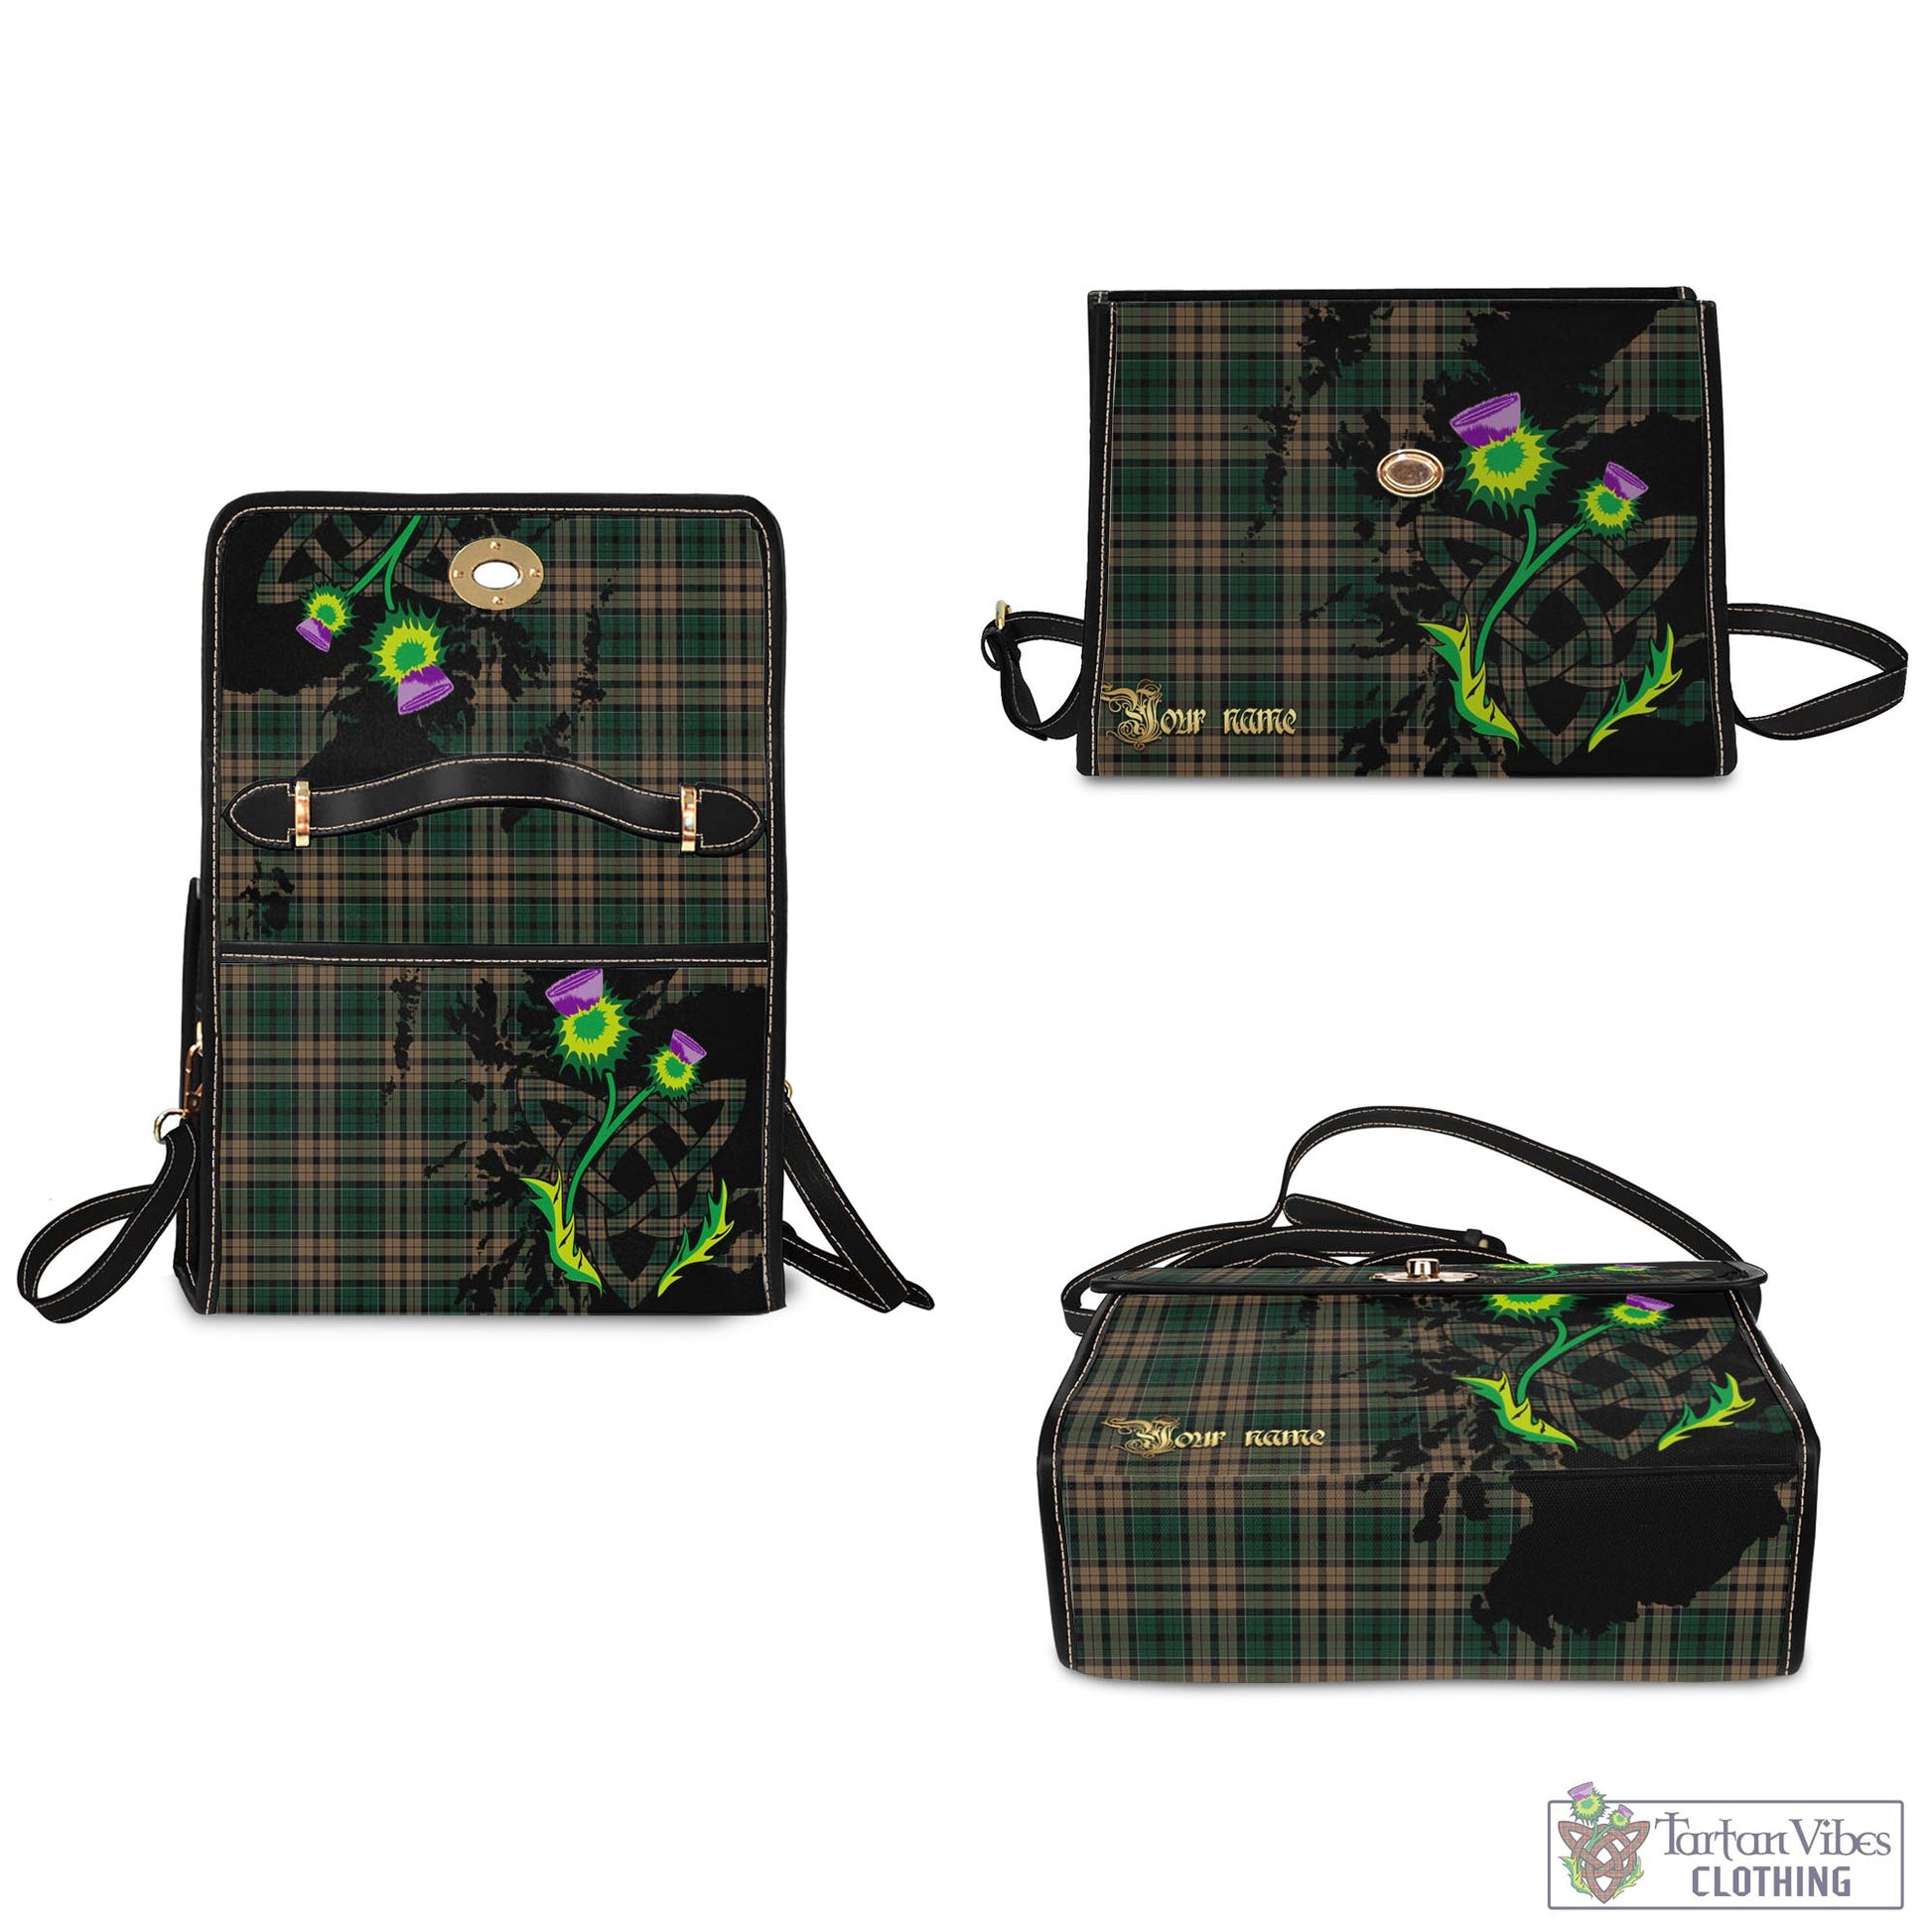 Tartan Vibes Clothing Sackett Tartan Waterproof Canvas Bag with Scotland Map and Thistle Celtic Accents